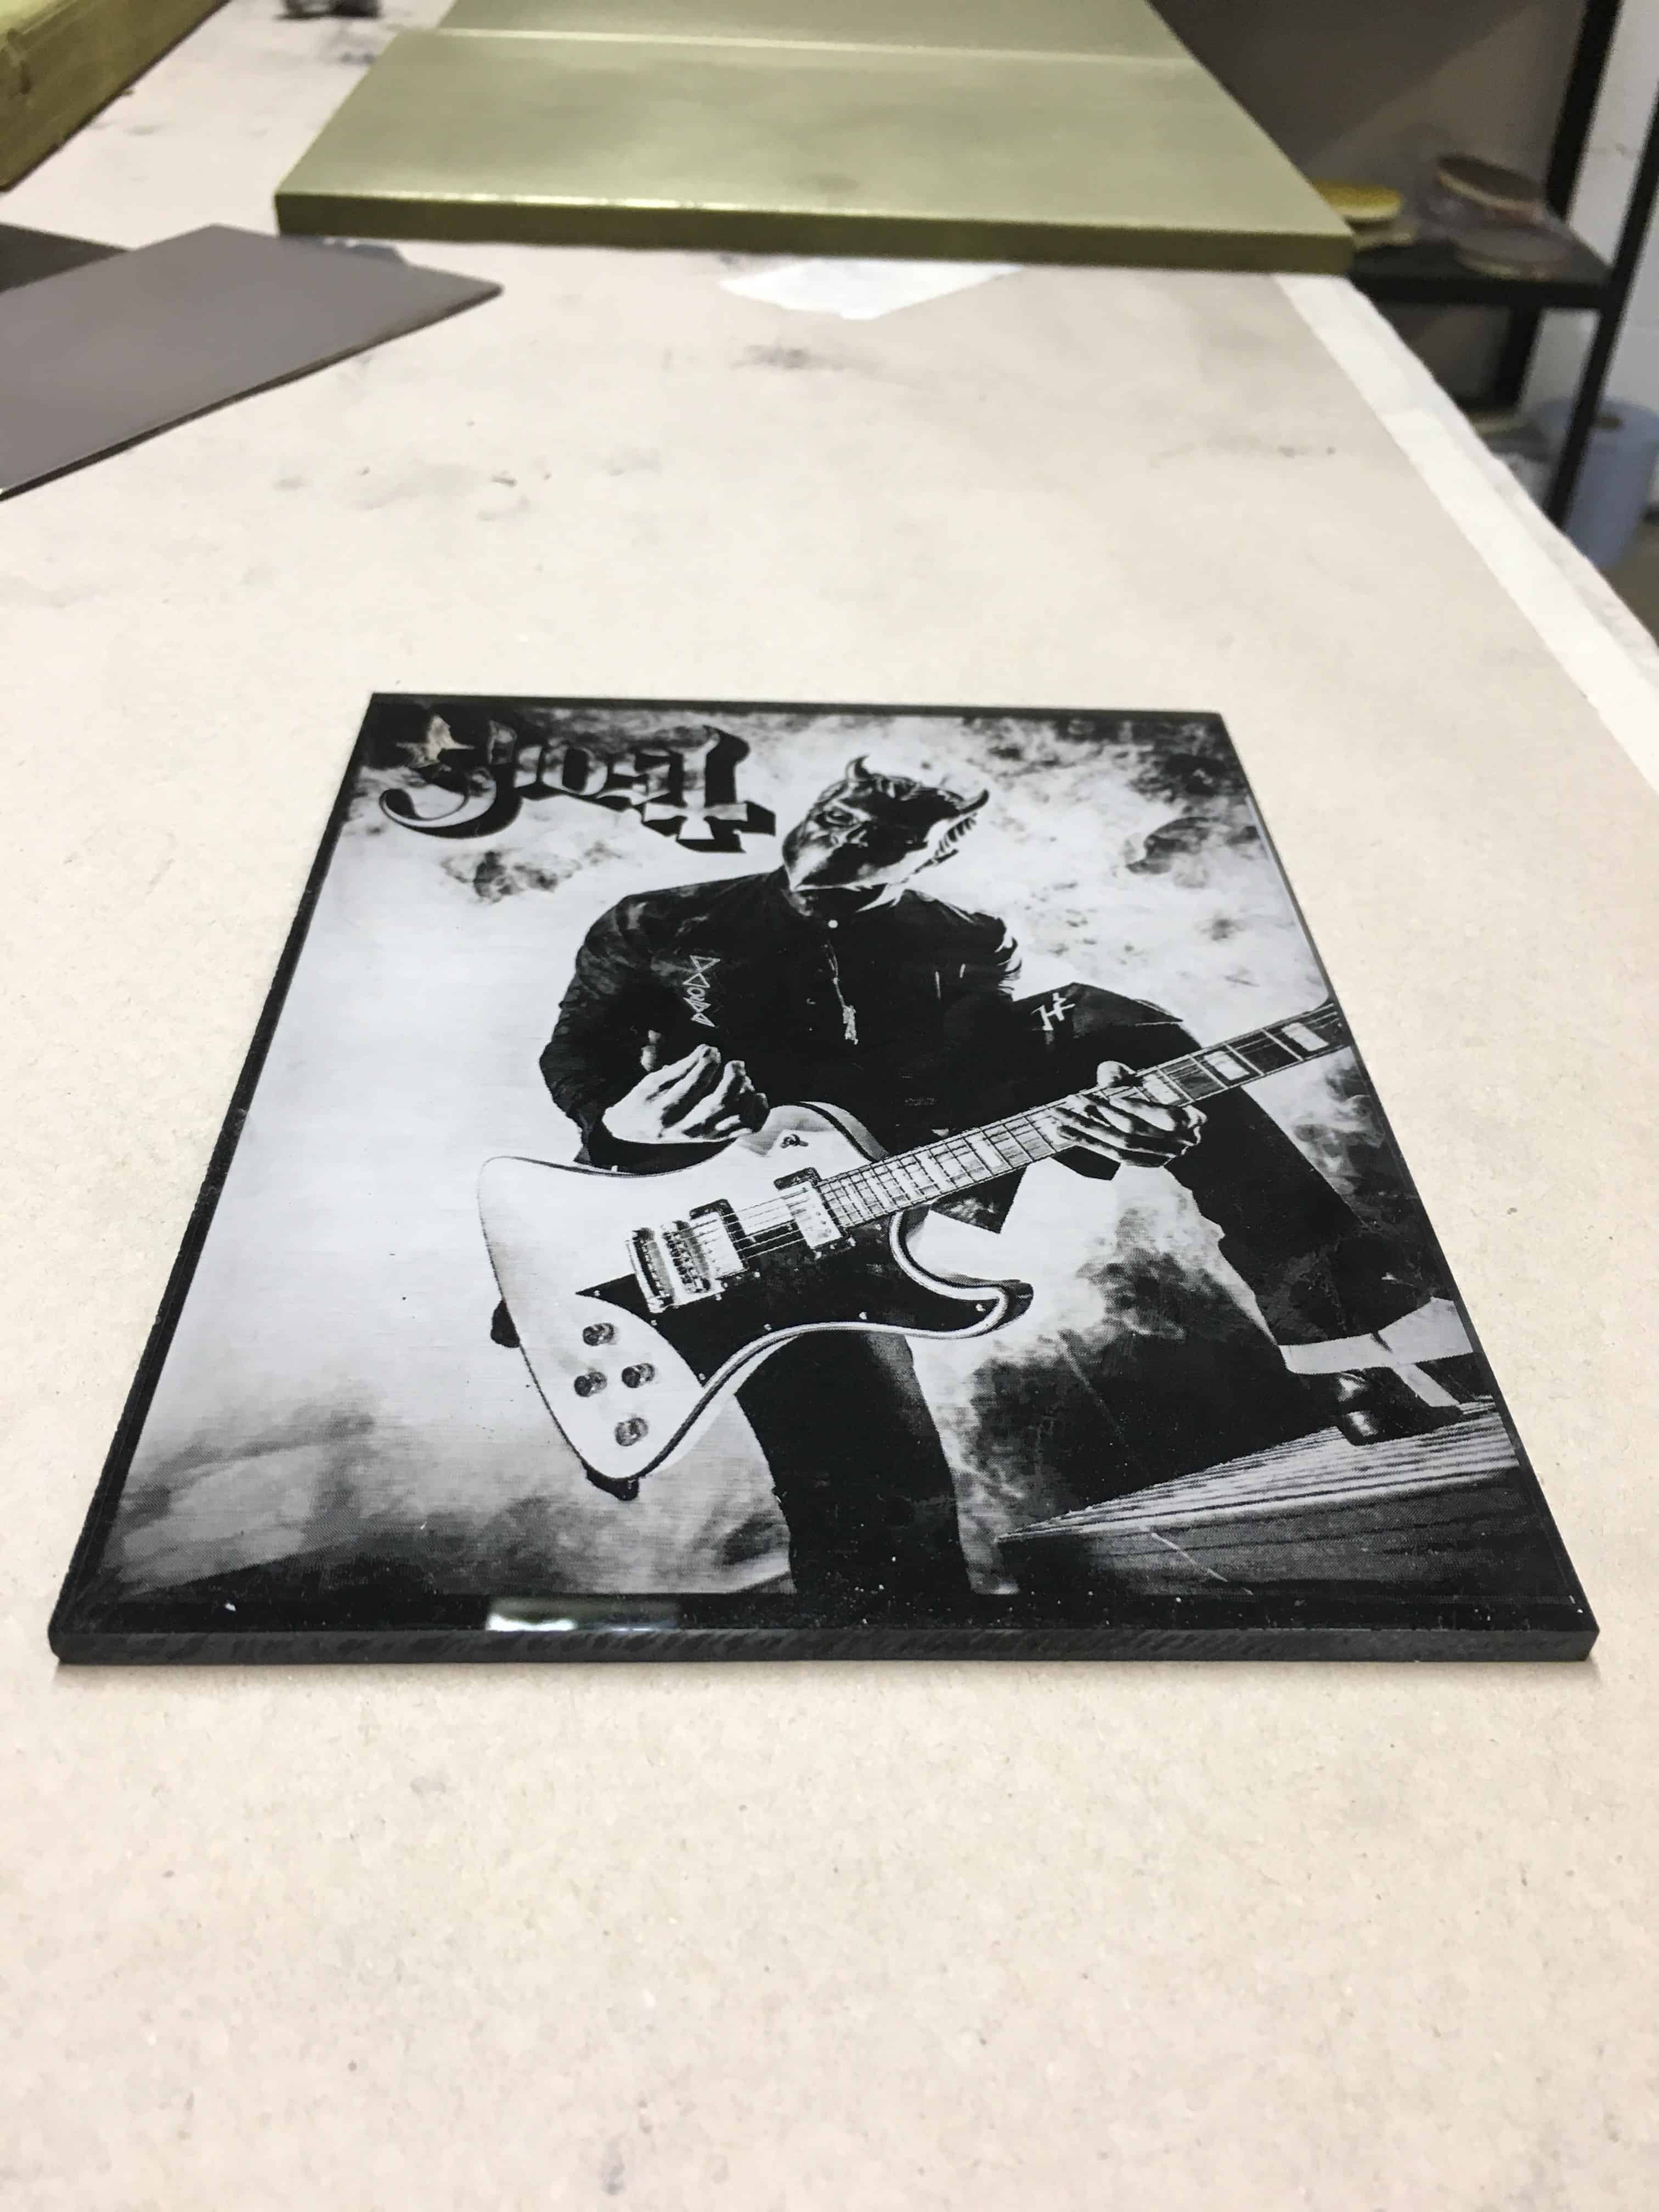 White Sprayed Black Acrylic, Laser Engraved to reveal the picture